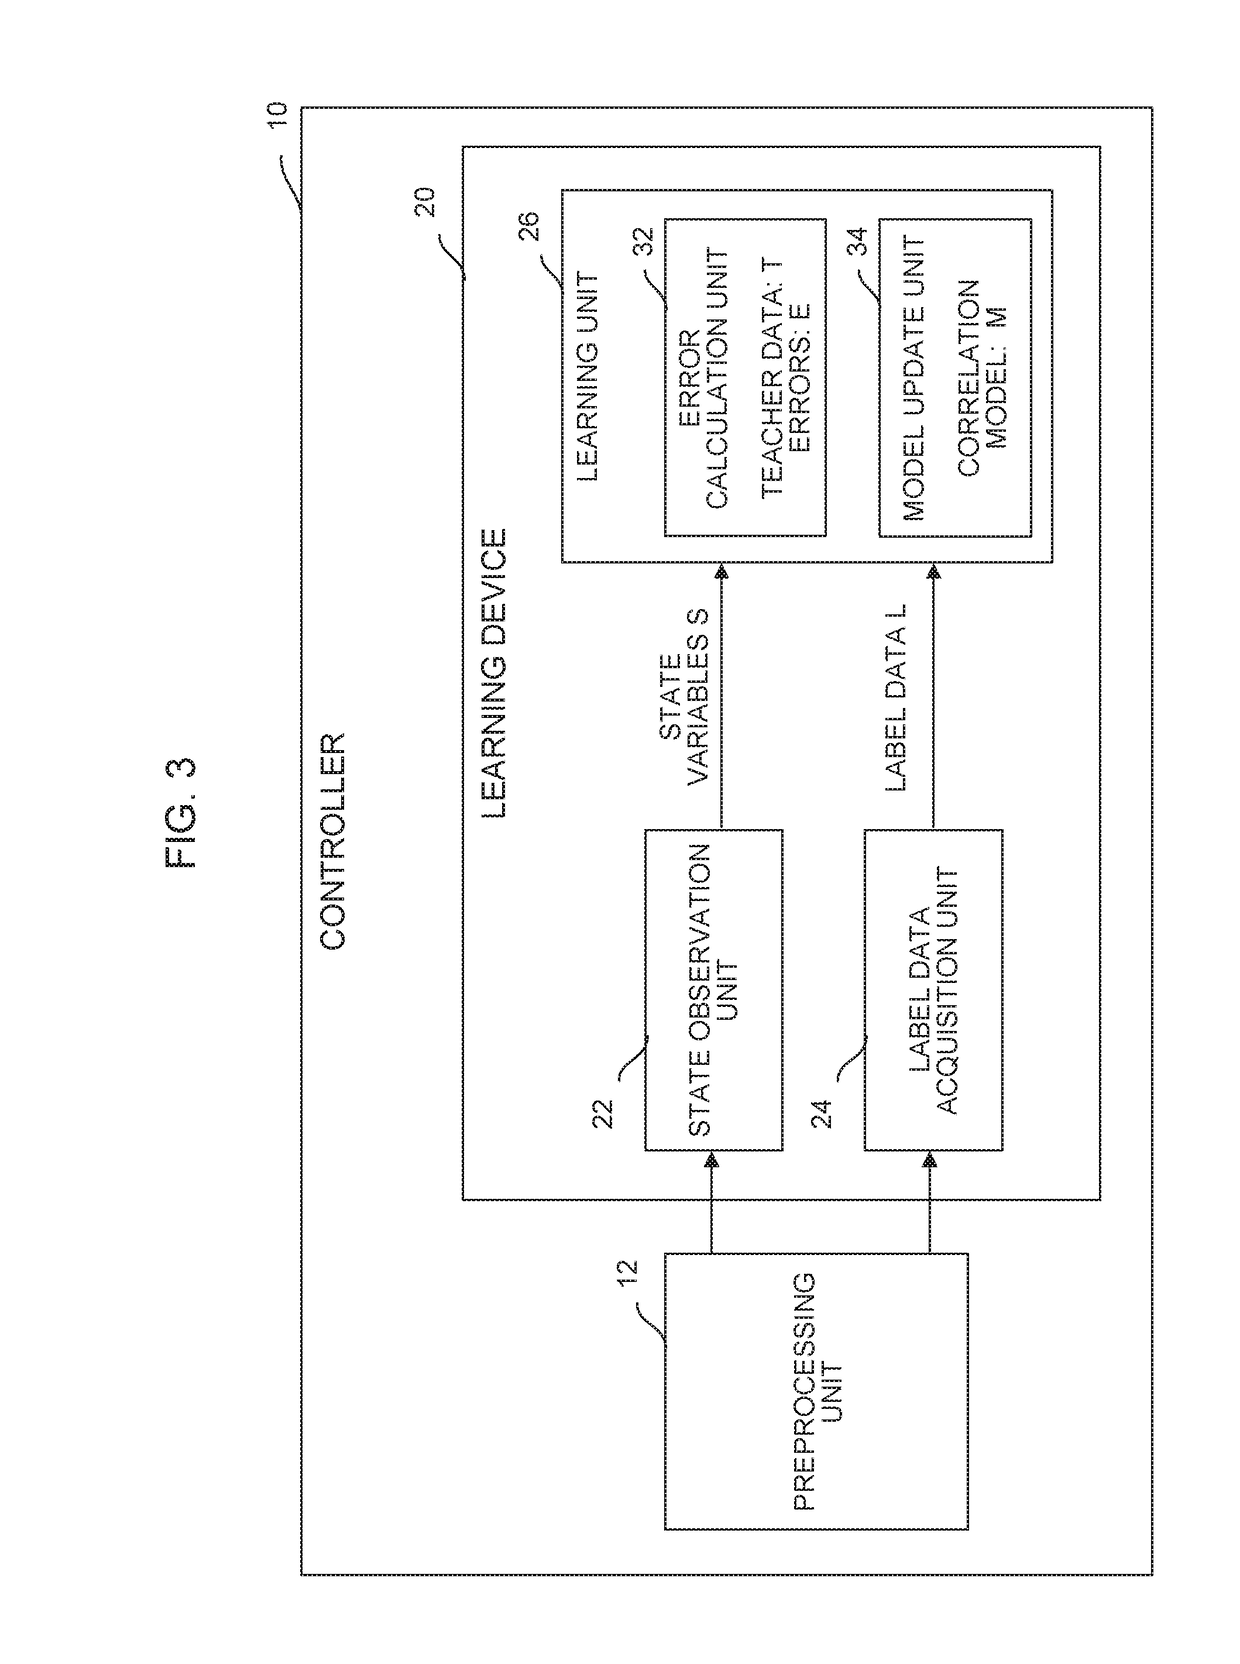 Learning device, controller, and control system